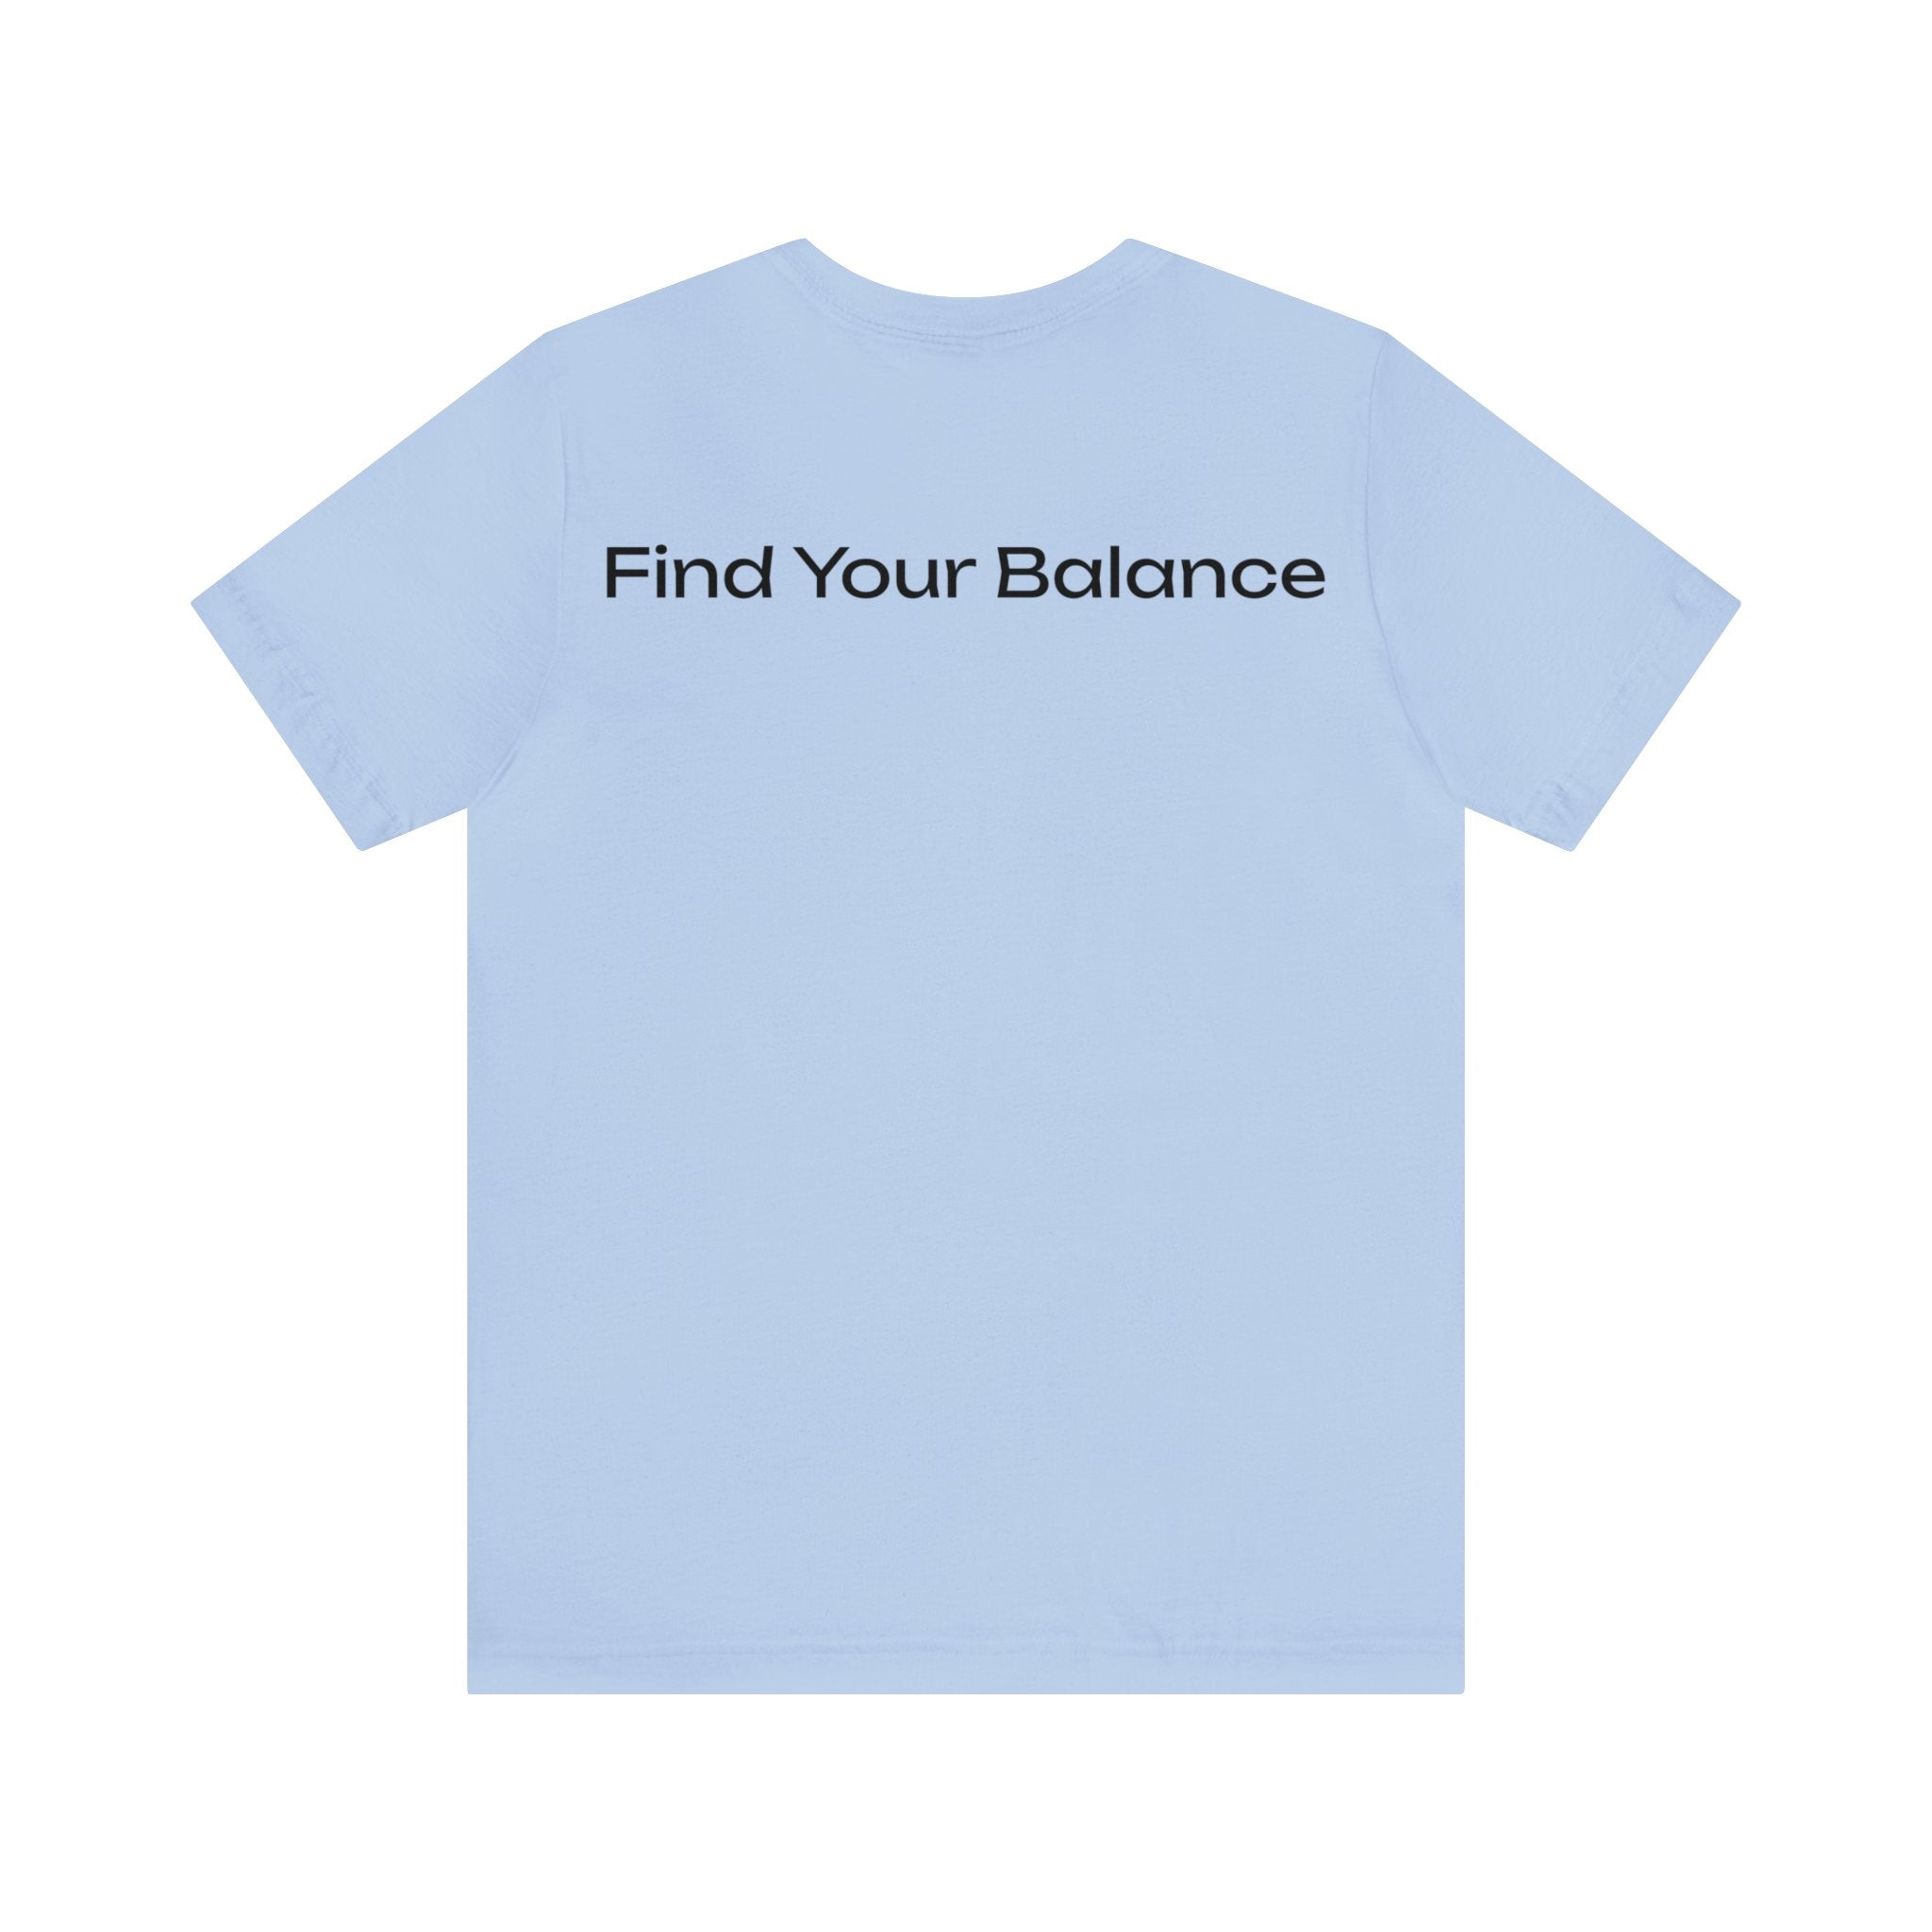 Find Your Balance Jersey Tee - Bella+Canvas 3001 Heather Mauve Airlume Cotton Bella+Canvas 3001 Crew Neckline Jersey Short Sleeve Lightweight Fabric Mental Health Support Retail Fit Tear-away Label Tee Unisex Tee T-Shirt 5159821766344025872_2048 Printify